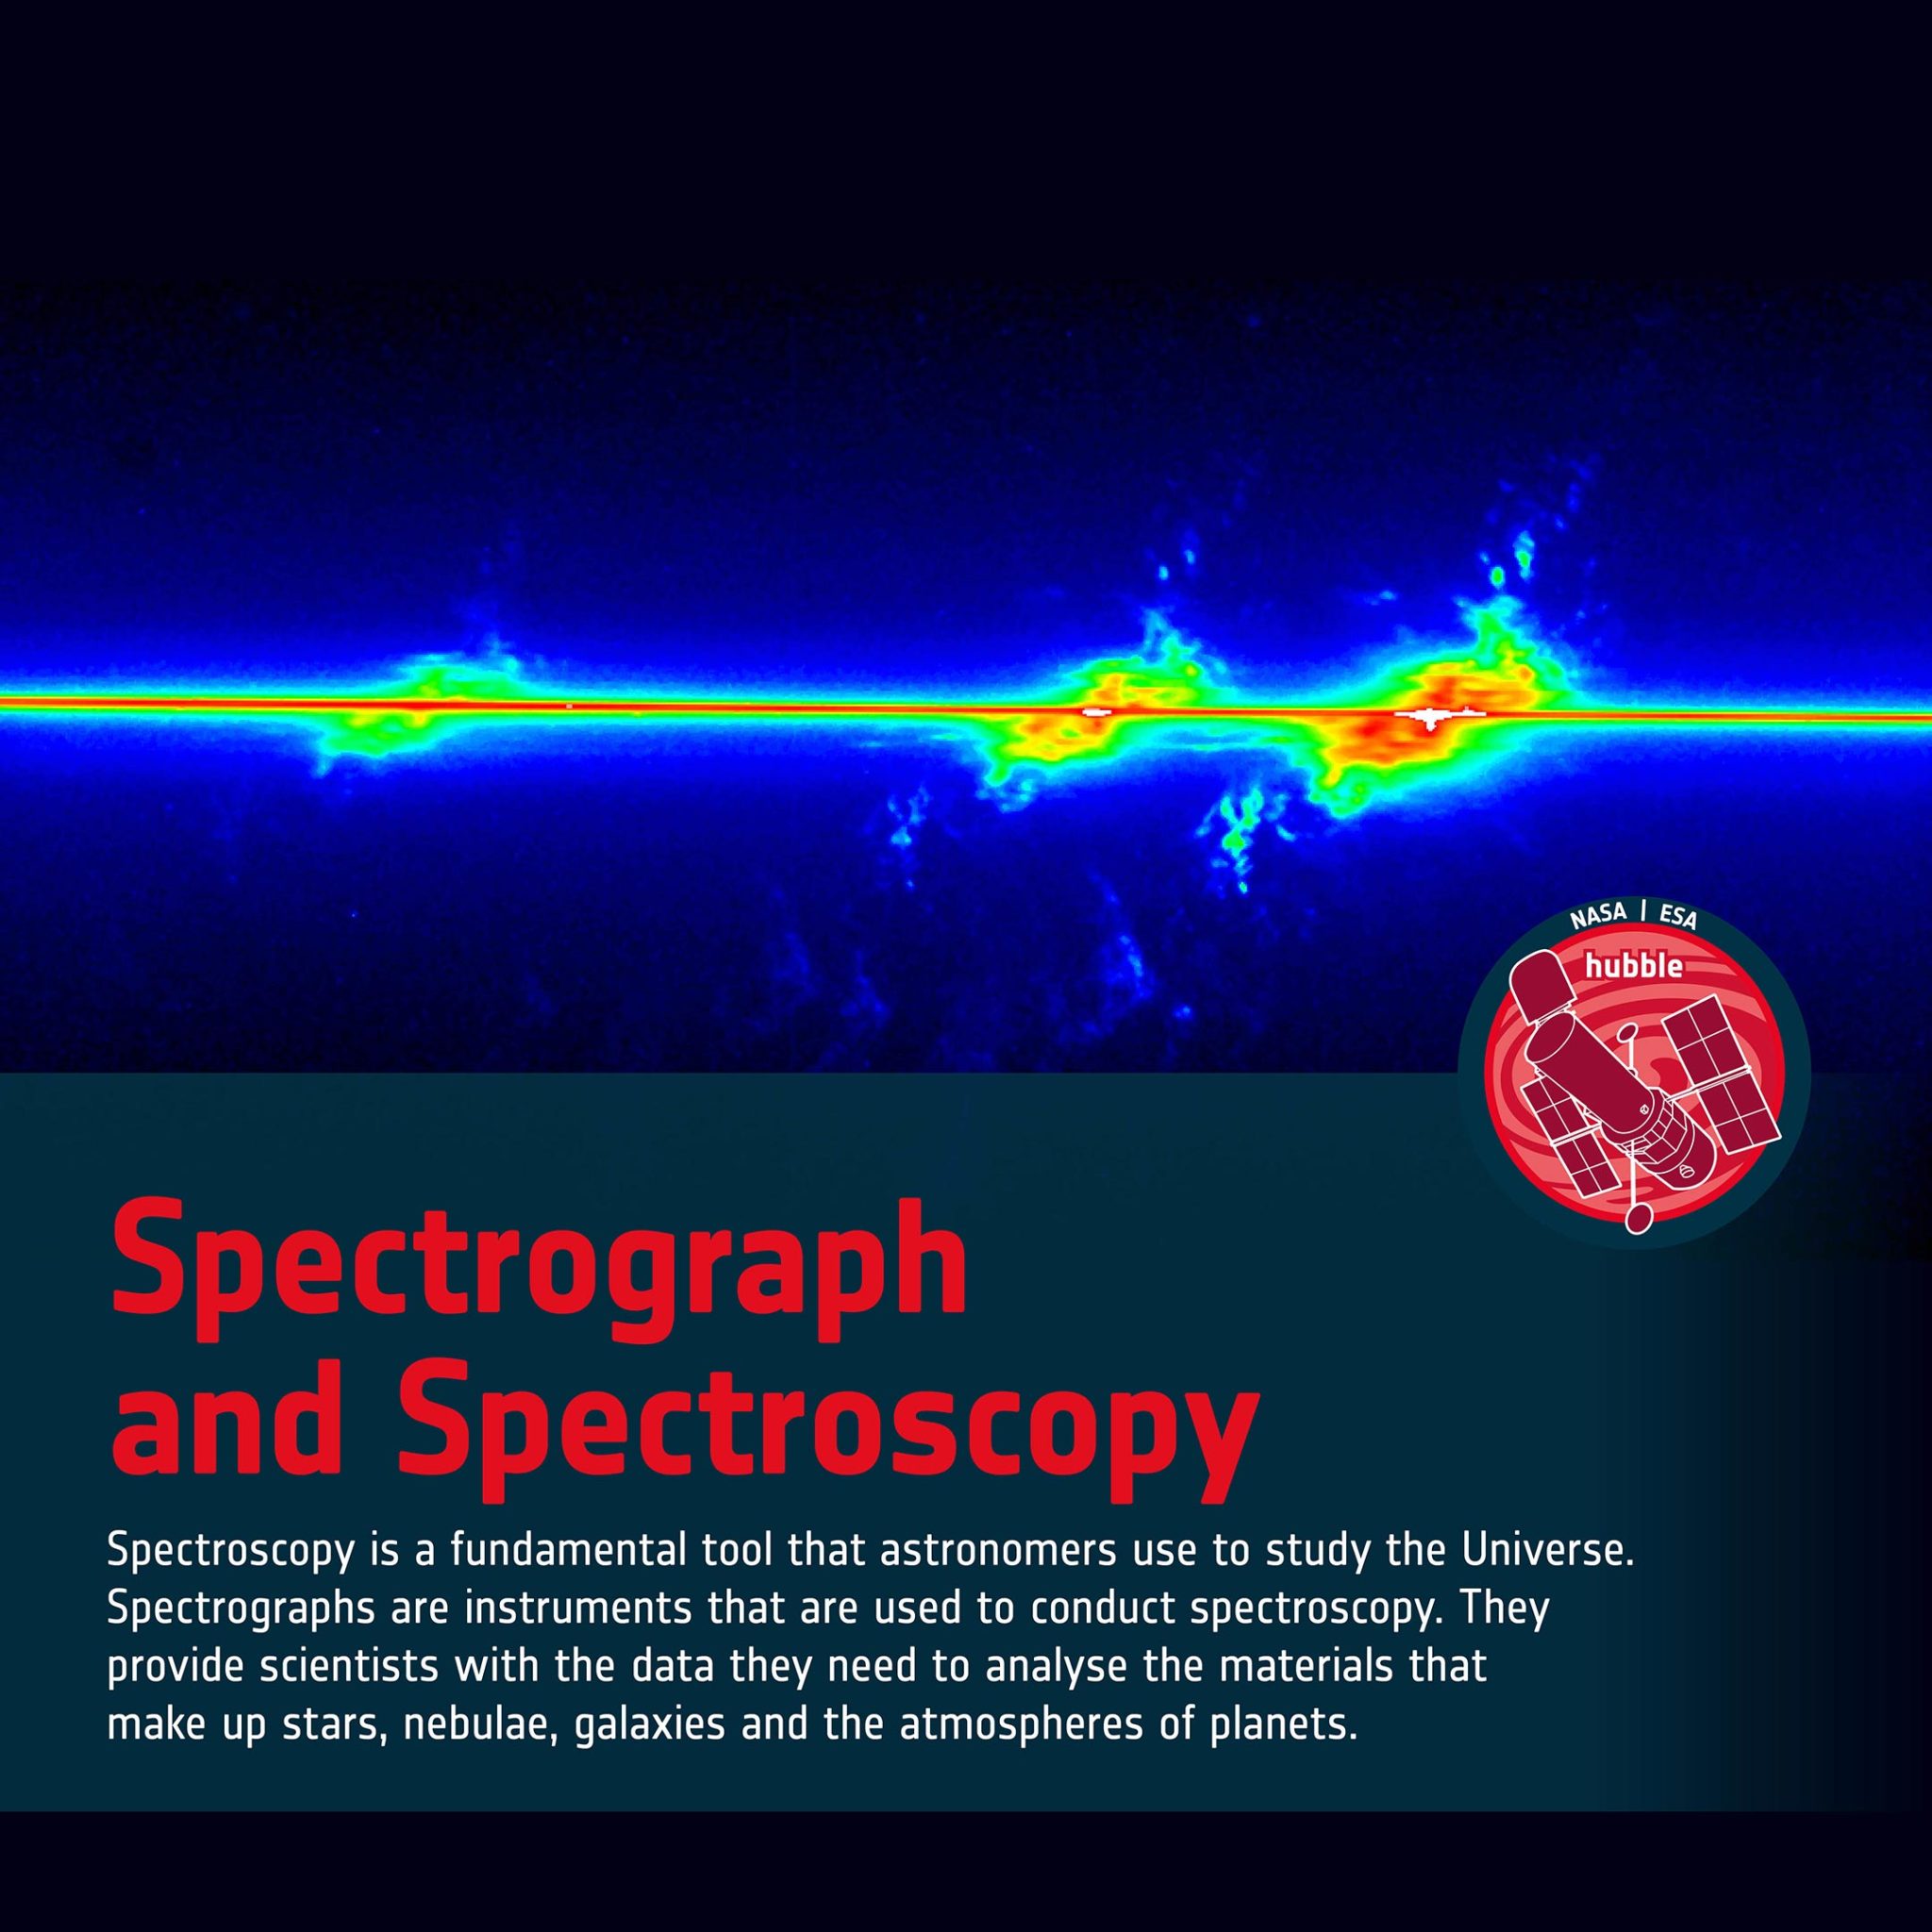 Word Bank Spectrograph and Spectroscopy